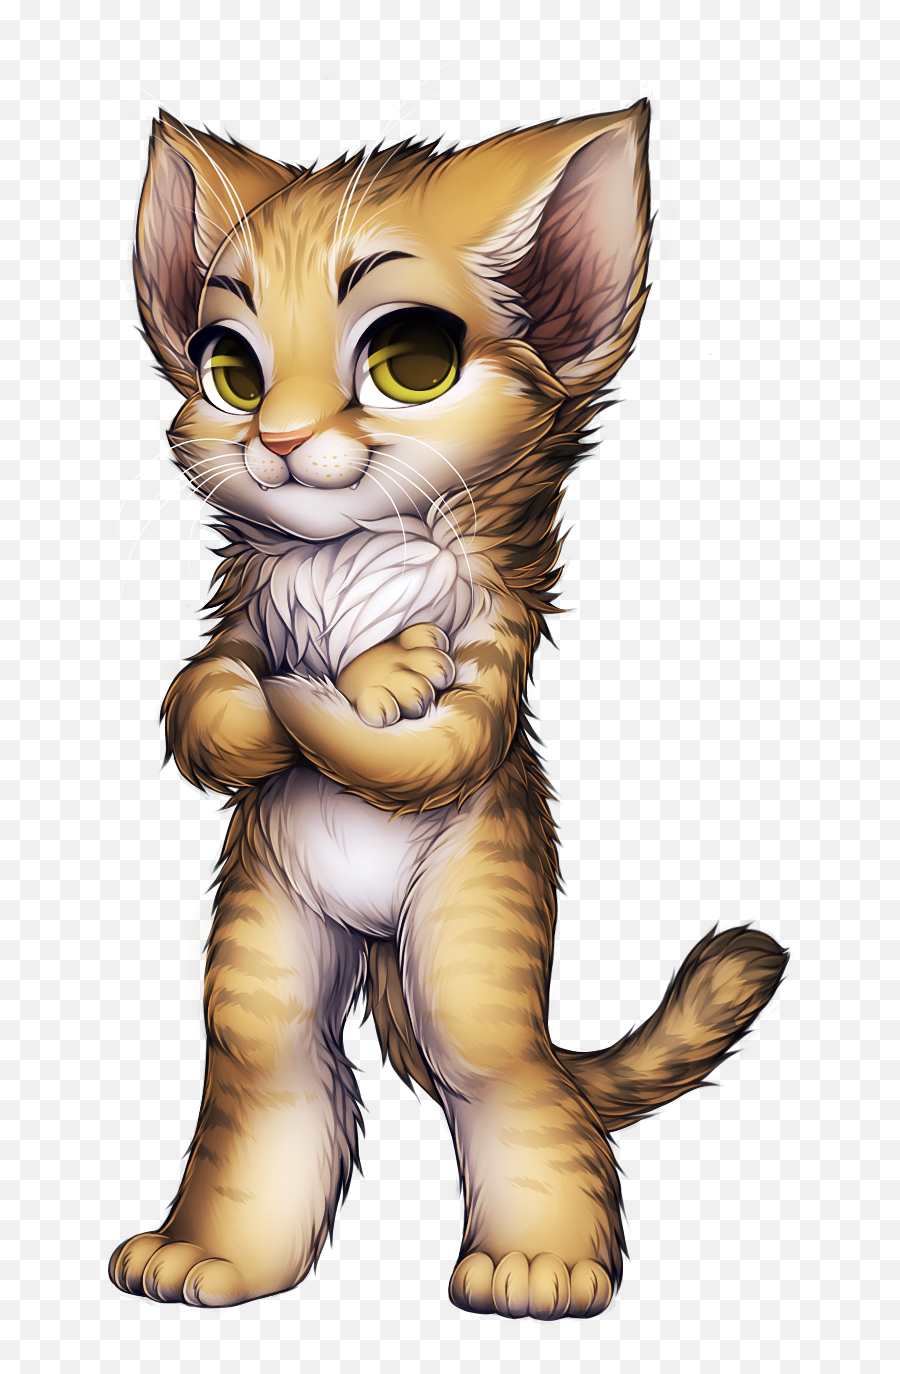 Download Ayseyvx - Maine Coon Siamese Cat Png Image With No Emoji,Siamese Cat Clipart